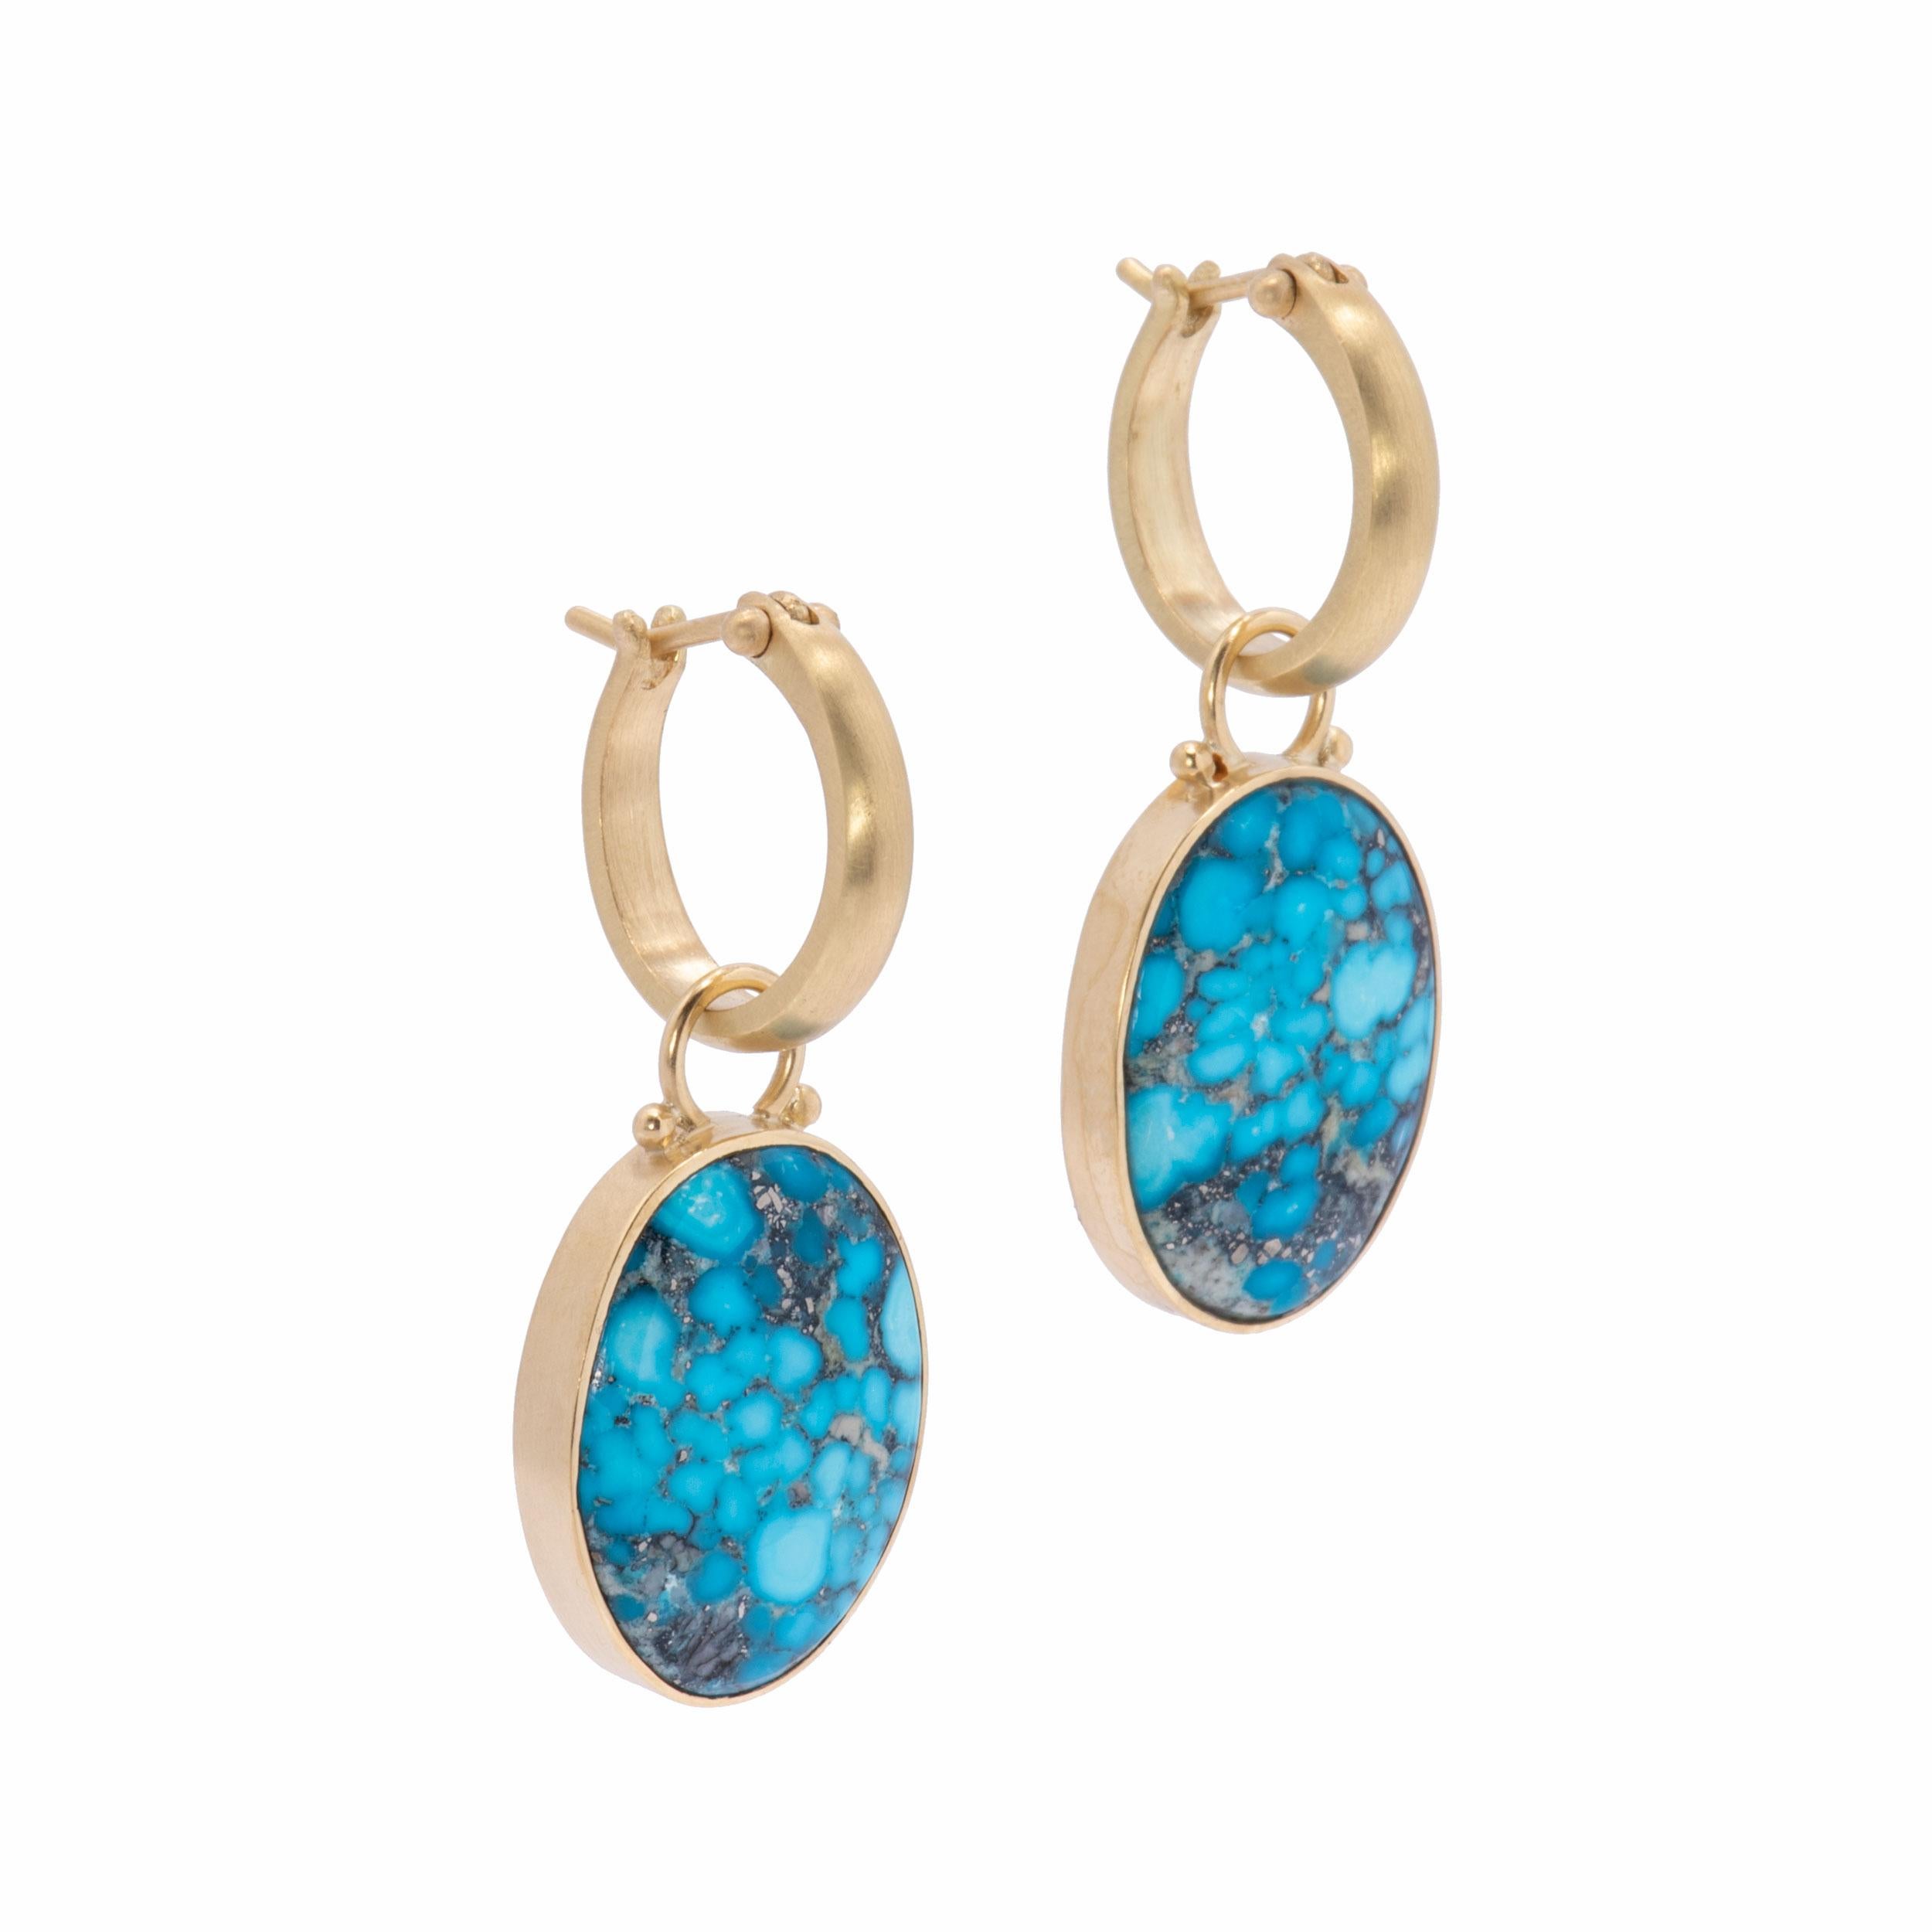 Natural Blue Kingman Turquoise Oval Drop Earrings are bezel set in 18k gold and backed with smoky, glowing mother of pearl. The simple drama of large Kingman Turquoise 30ctw. is alive with a strong matrix of black and silver and is framed in 18k